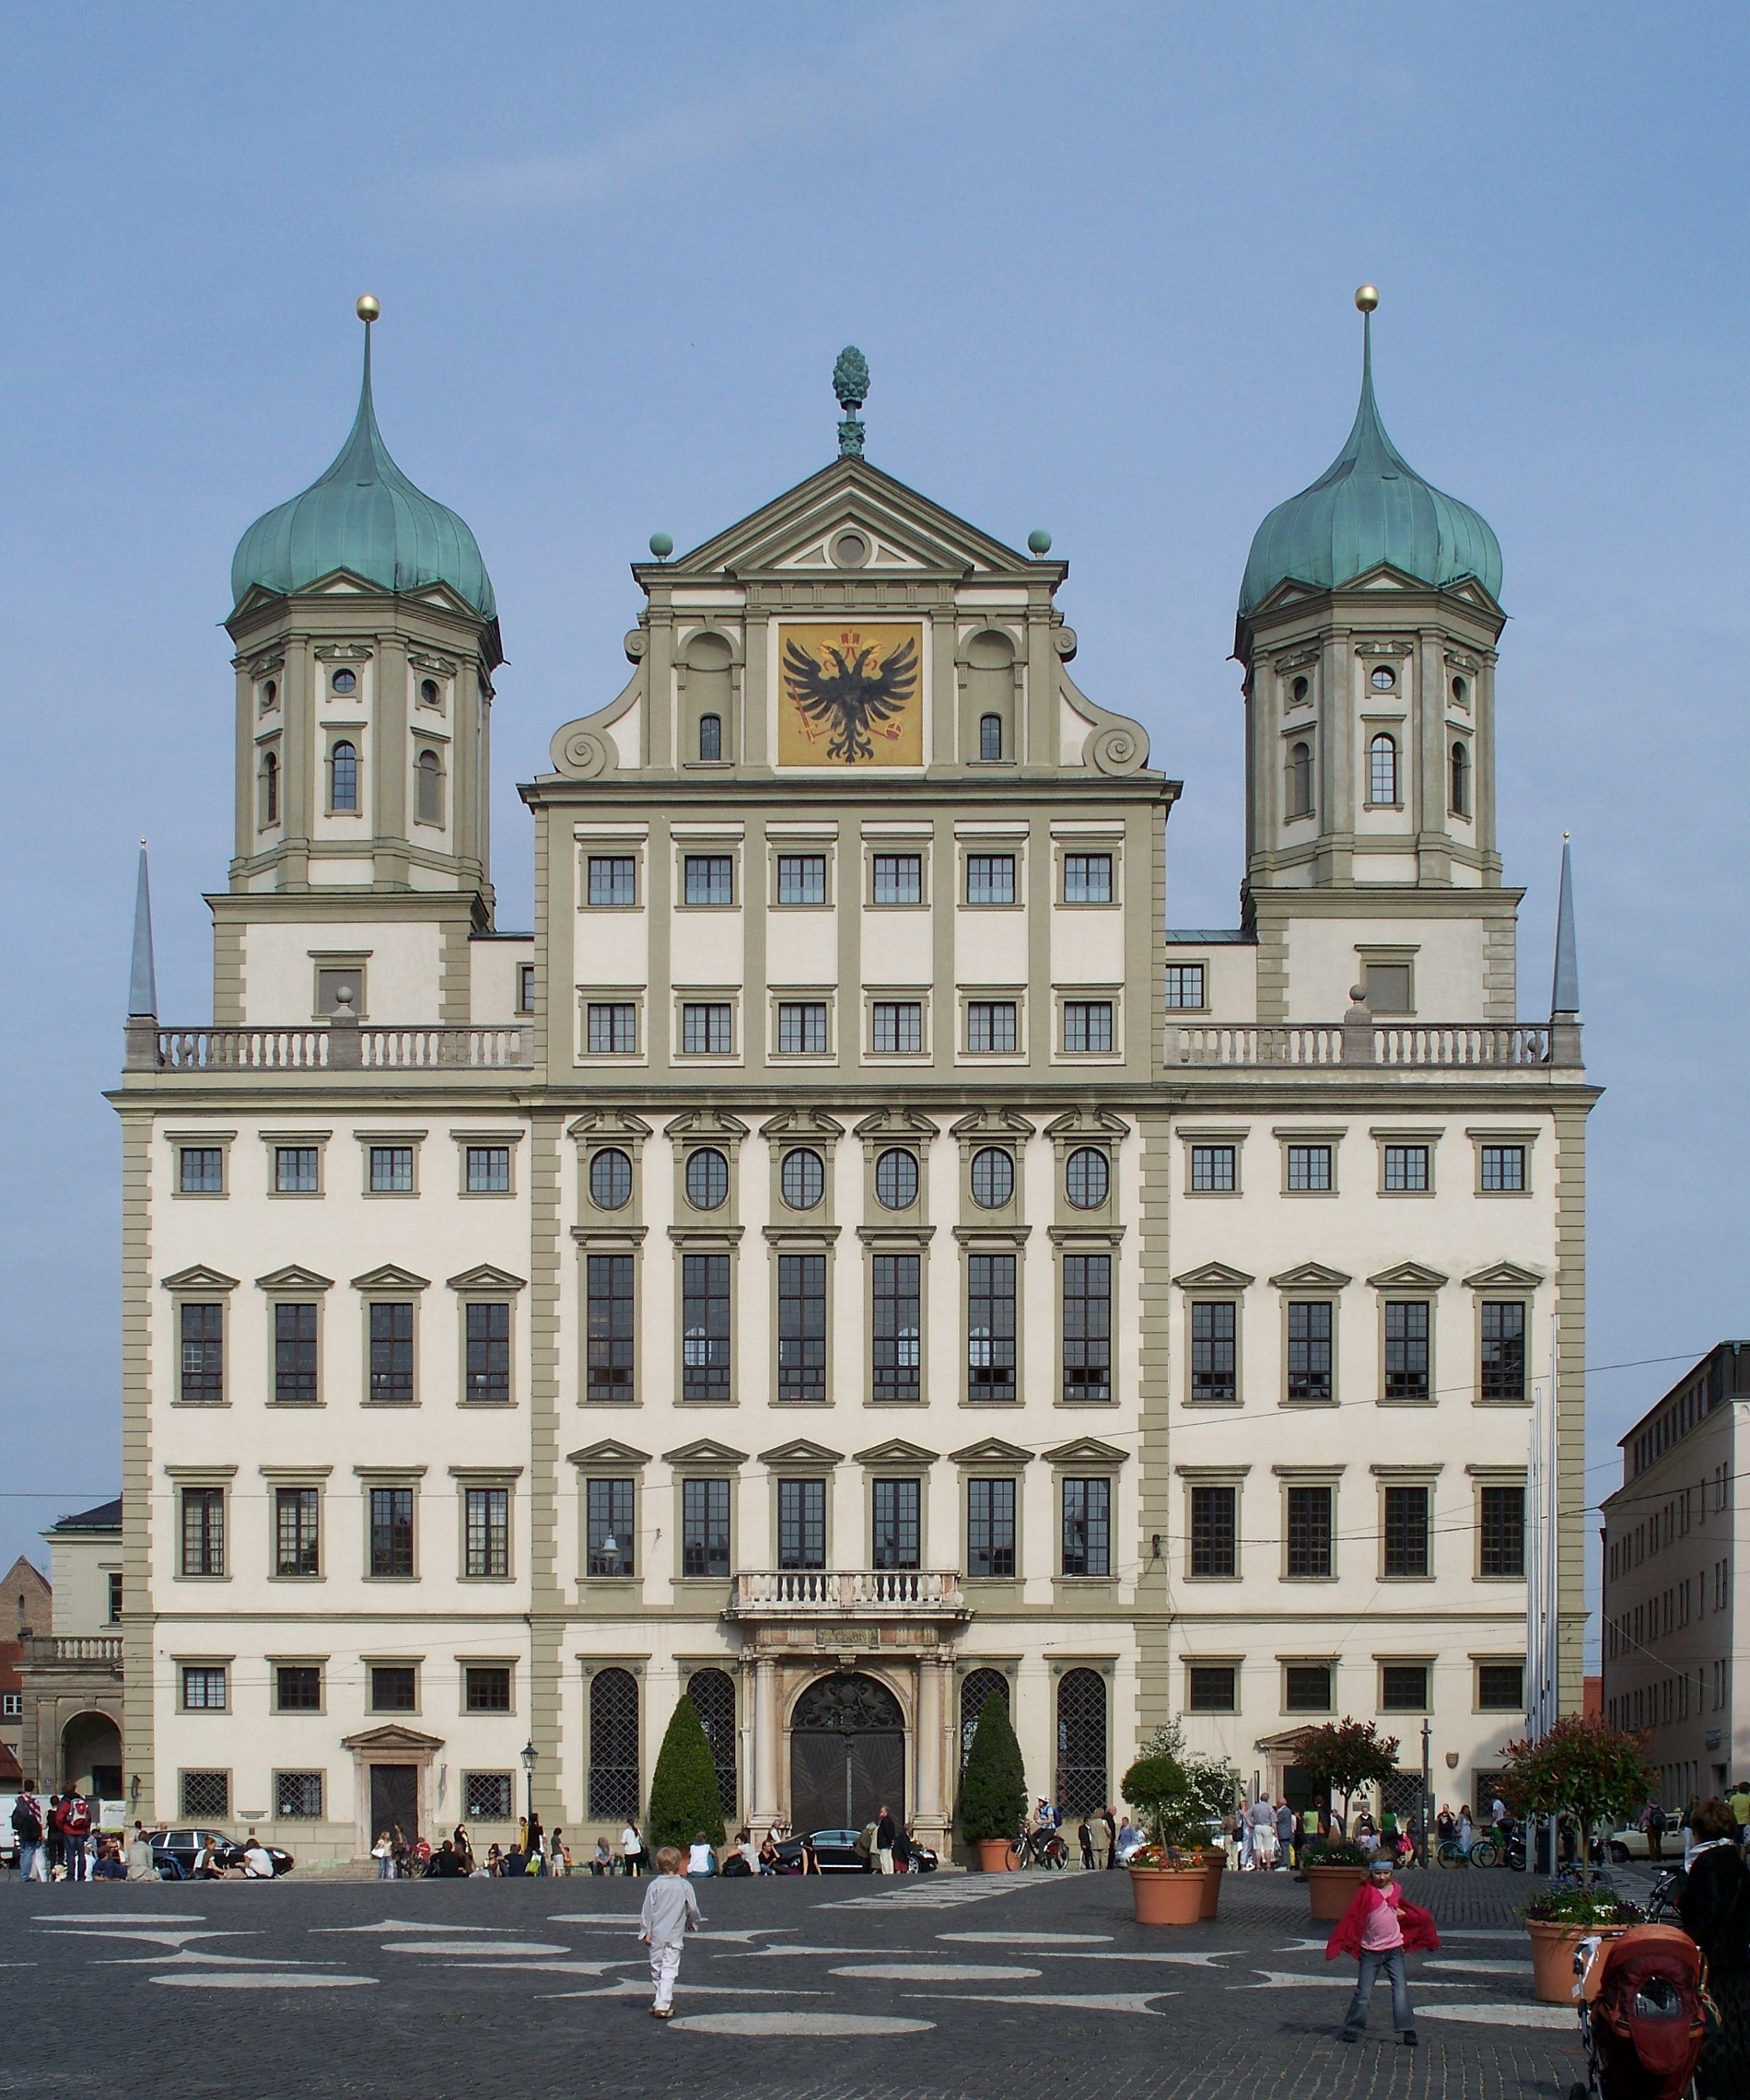 The Town Hall of Augsburg